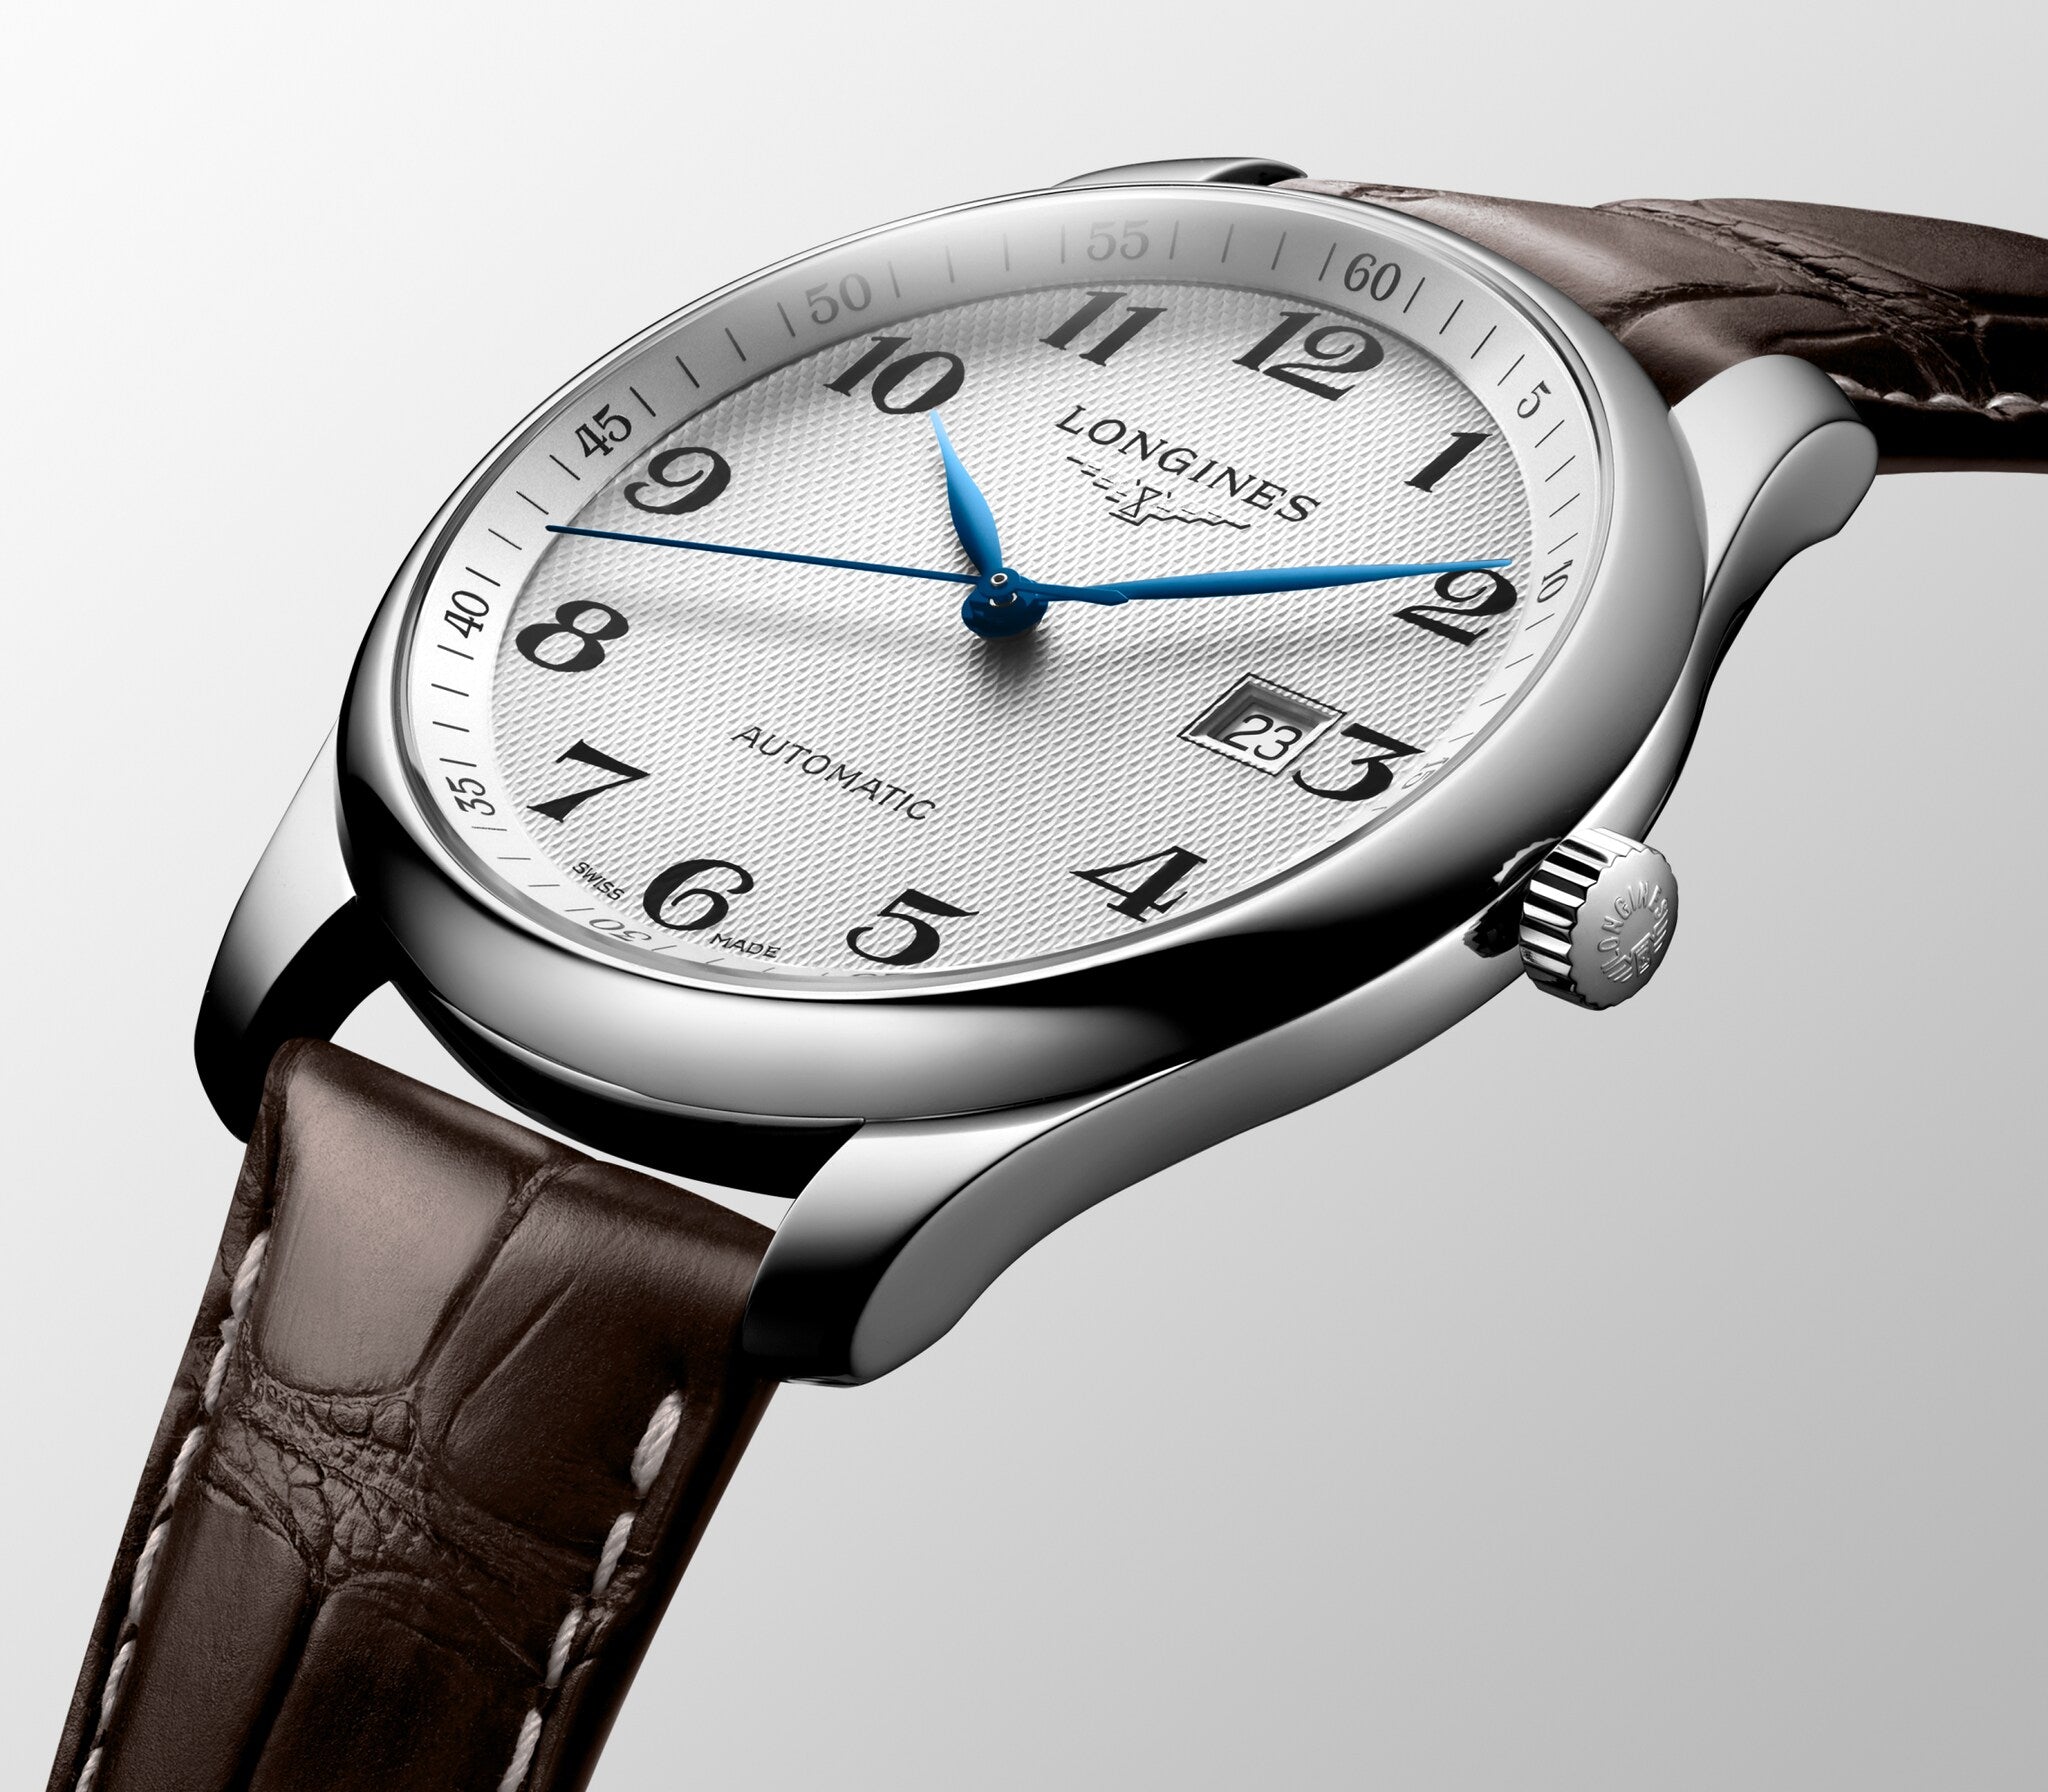 THE LONGINES MASTER COLLECTION L2.893.4.78.3